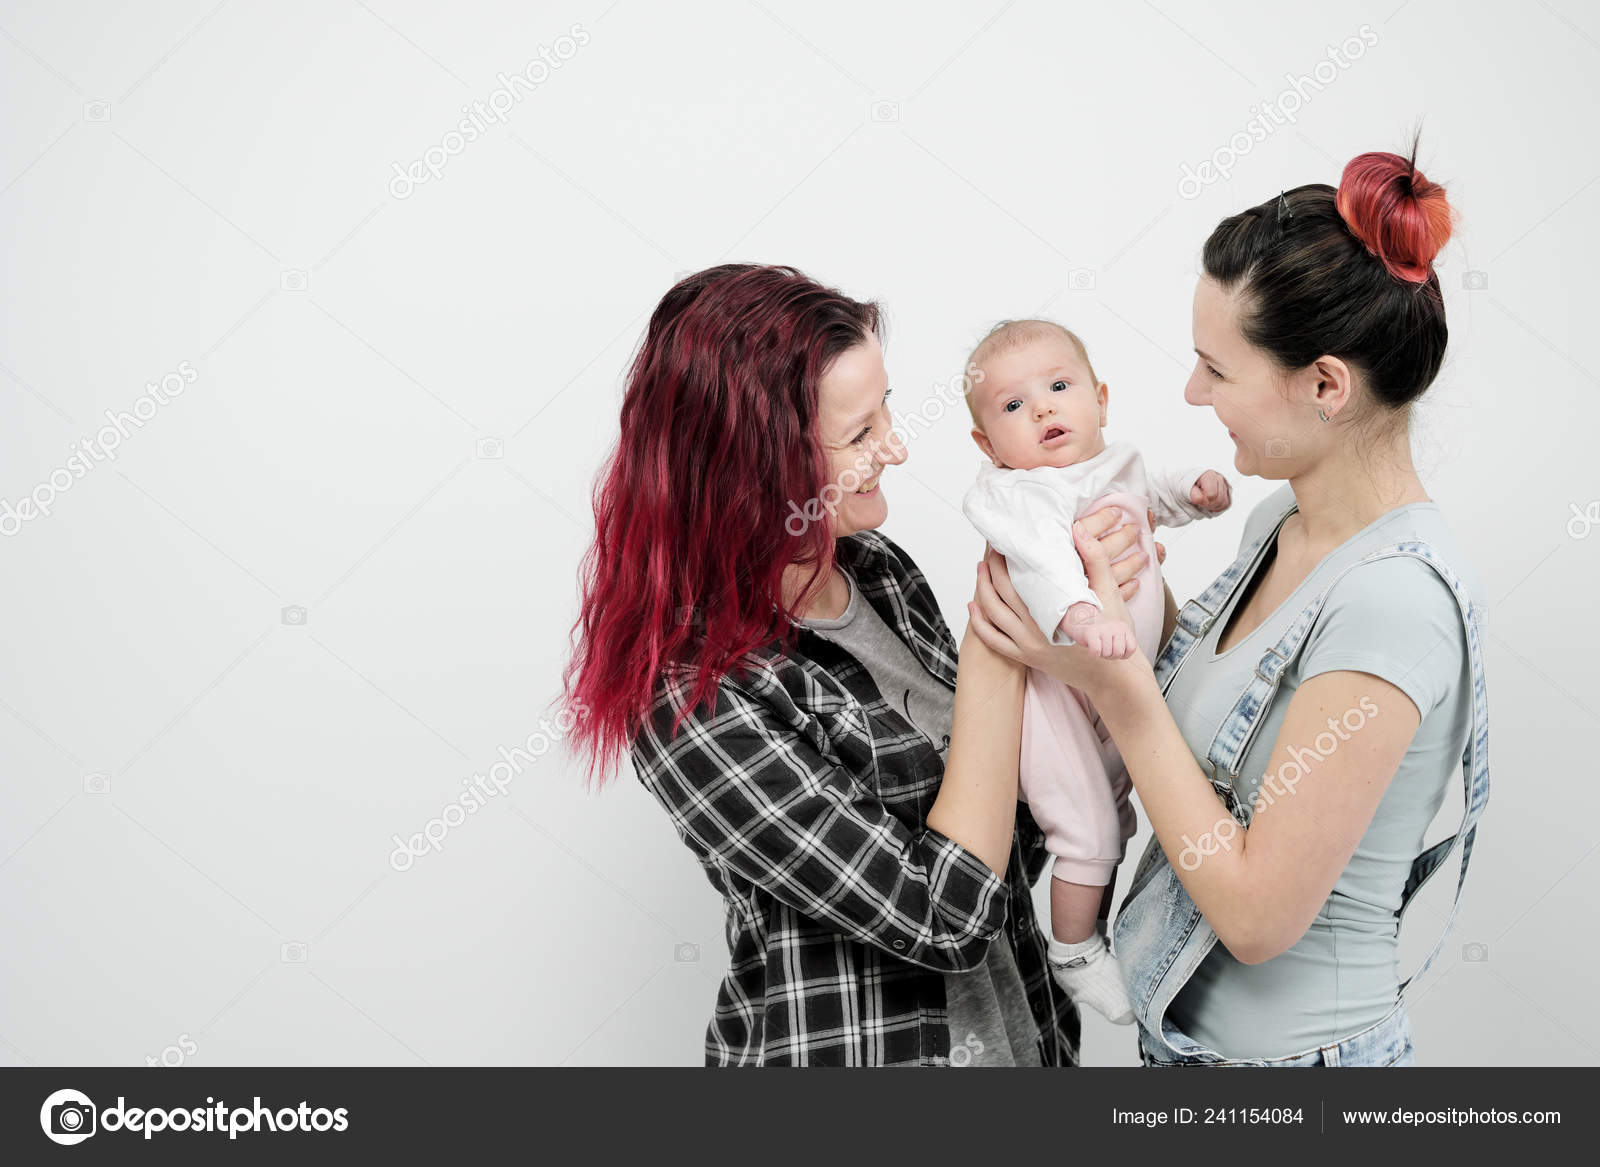 Two young women with a baby on a white background